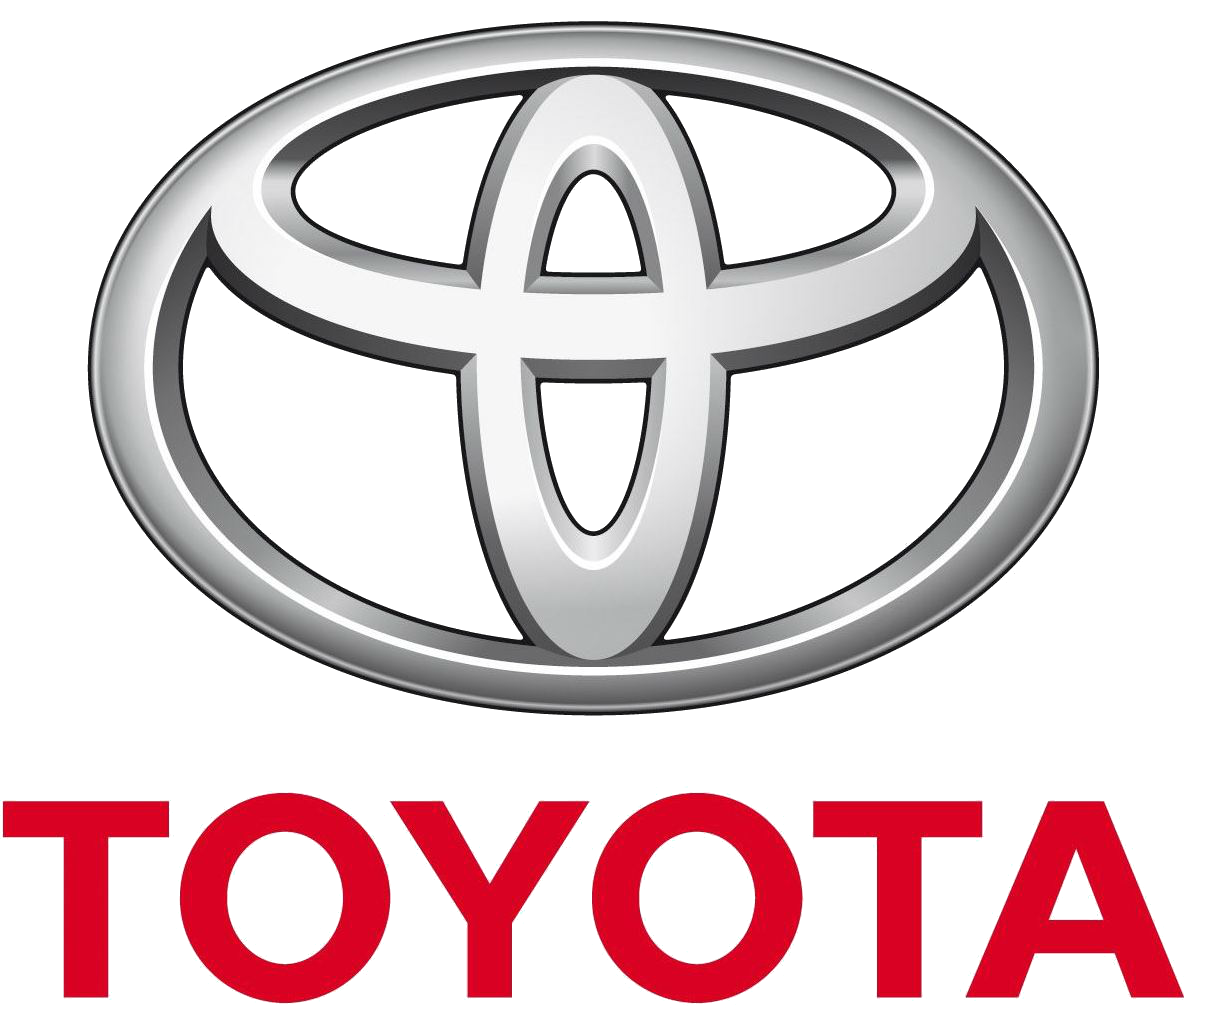 what is the meaning of toyota symbol #5